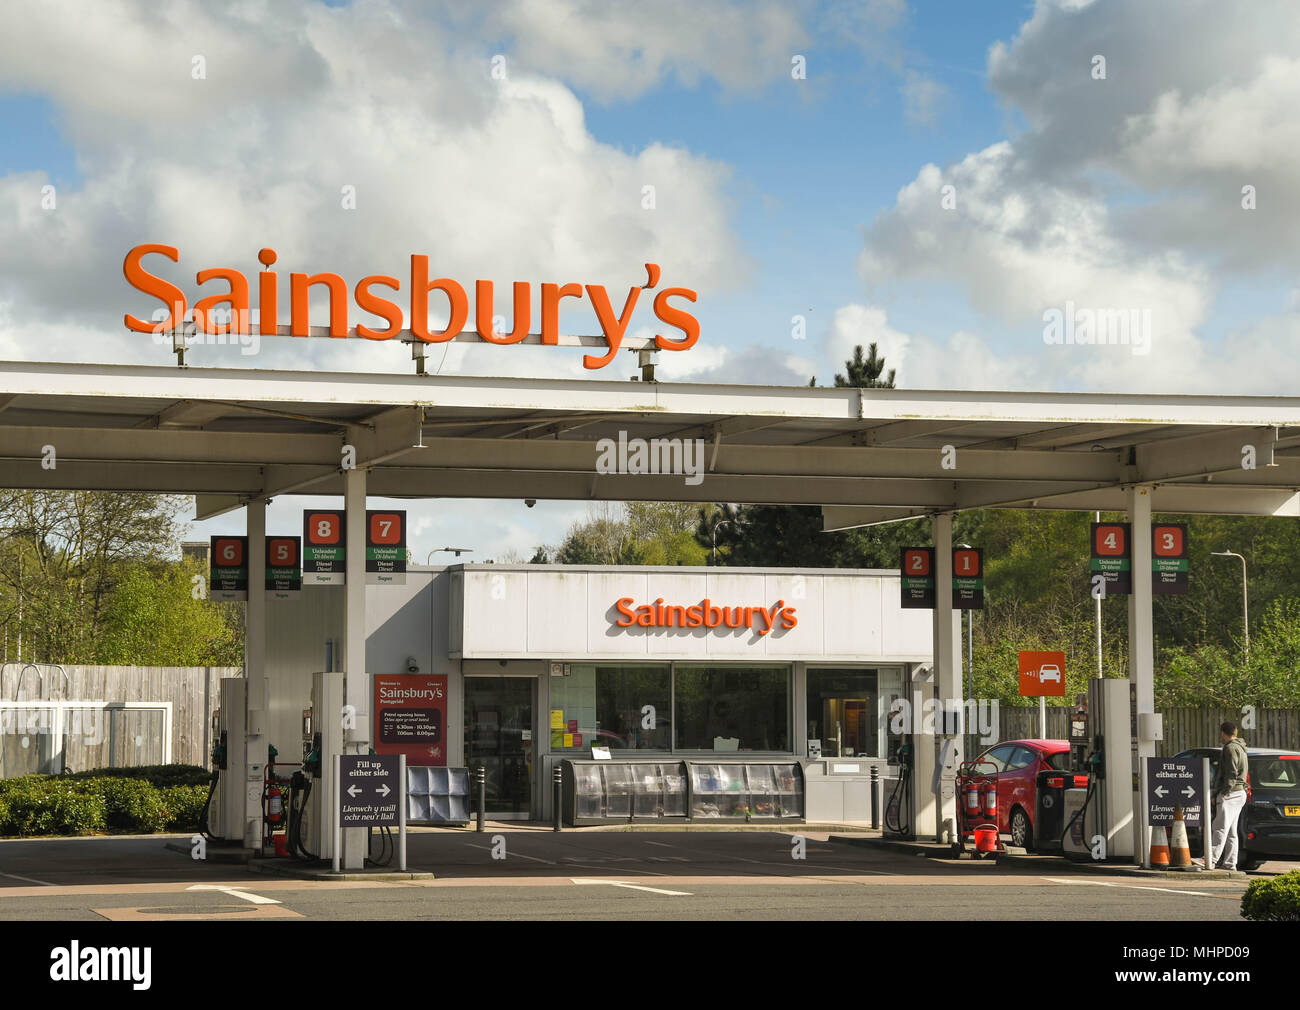 Wide angle view of the large sign above a petrol station at a Sainsbury's supermarket and the kiosk Stock Photo